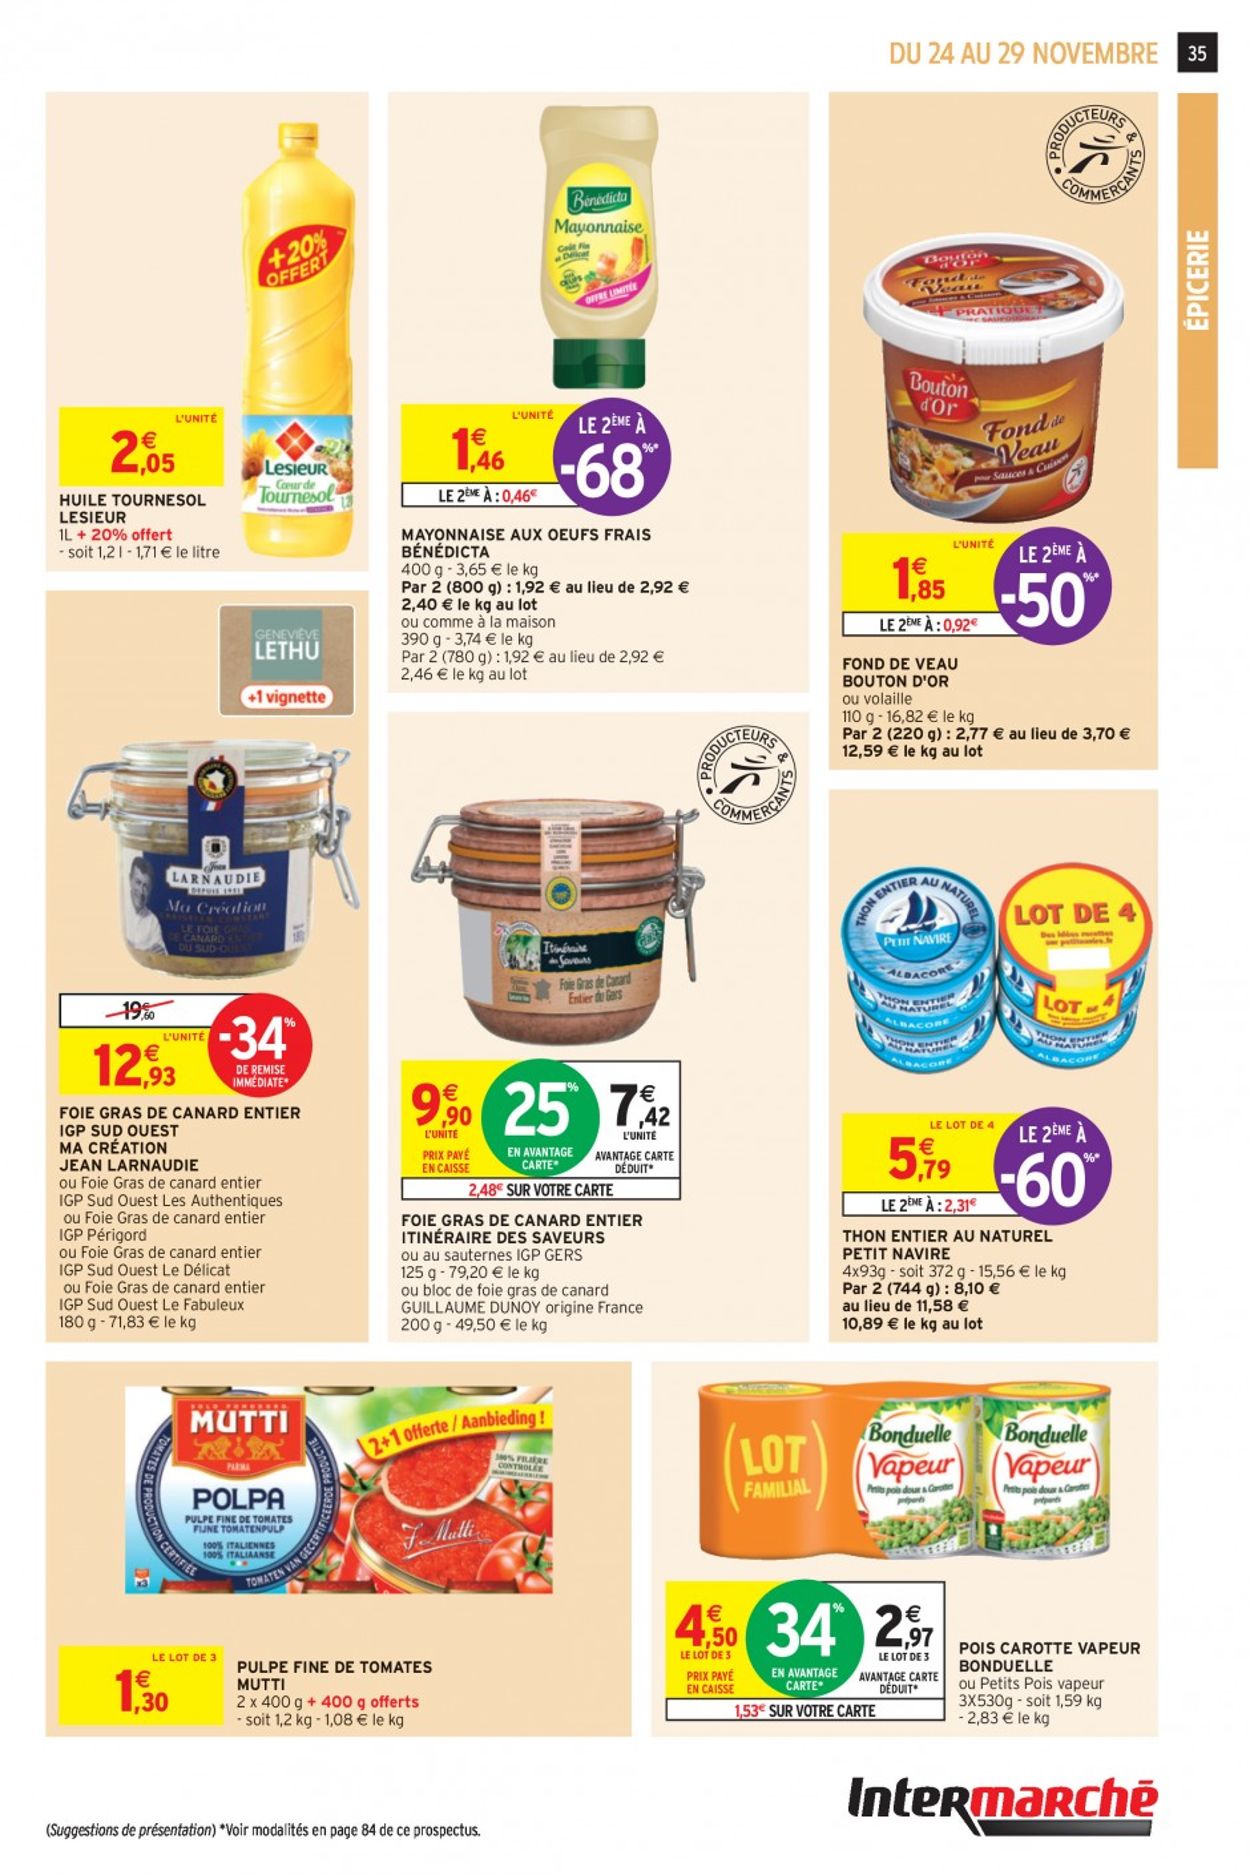 Intermarché Black Friday 2020 Catalogue - 24.11-29.11.2020 (Page 35)